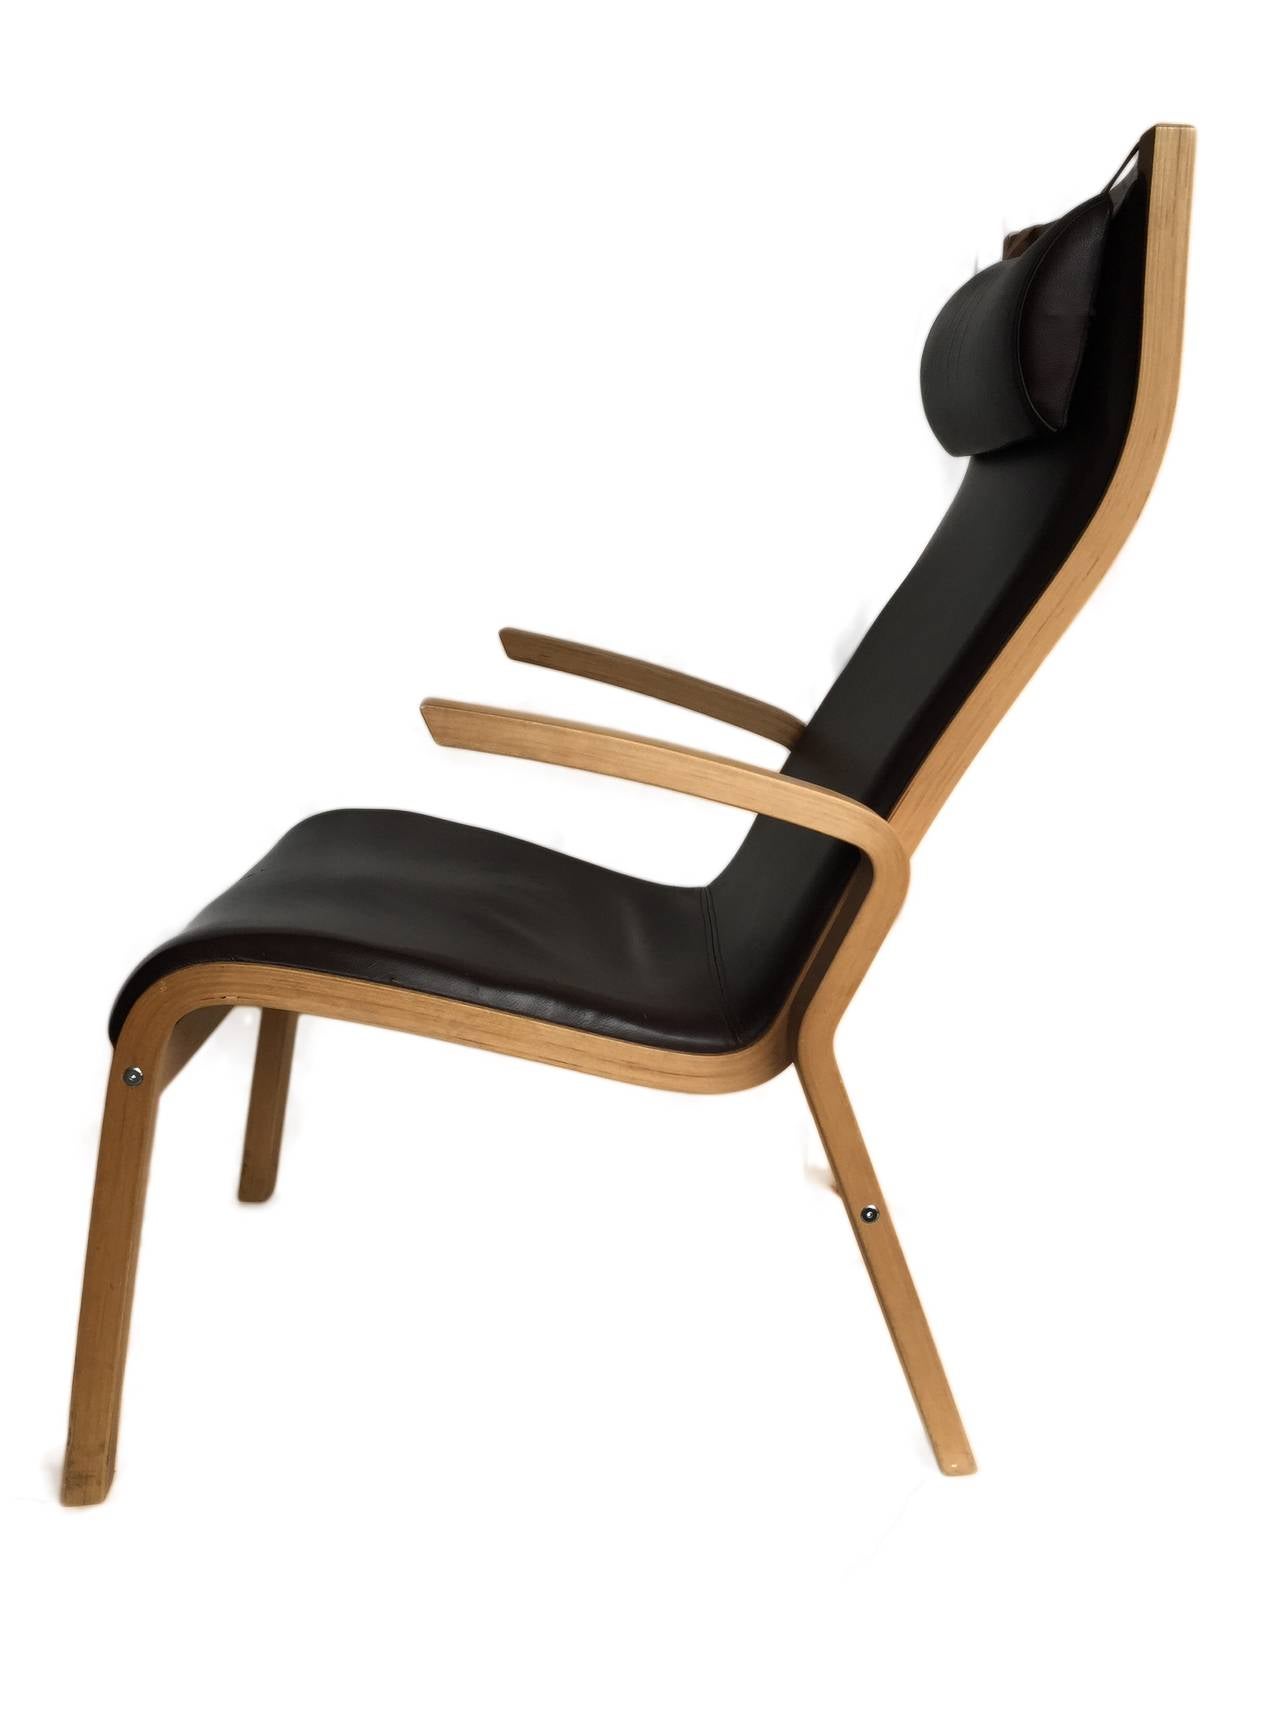 Danish bentwood armchair by Jakob Berg.
1960's Oak and Deep brown Leather.